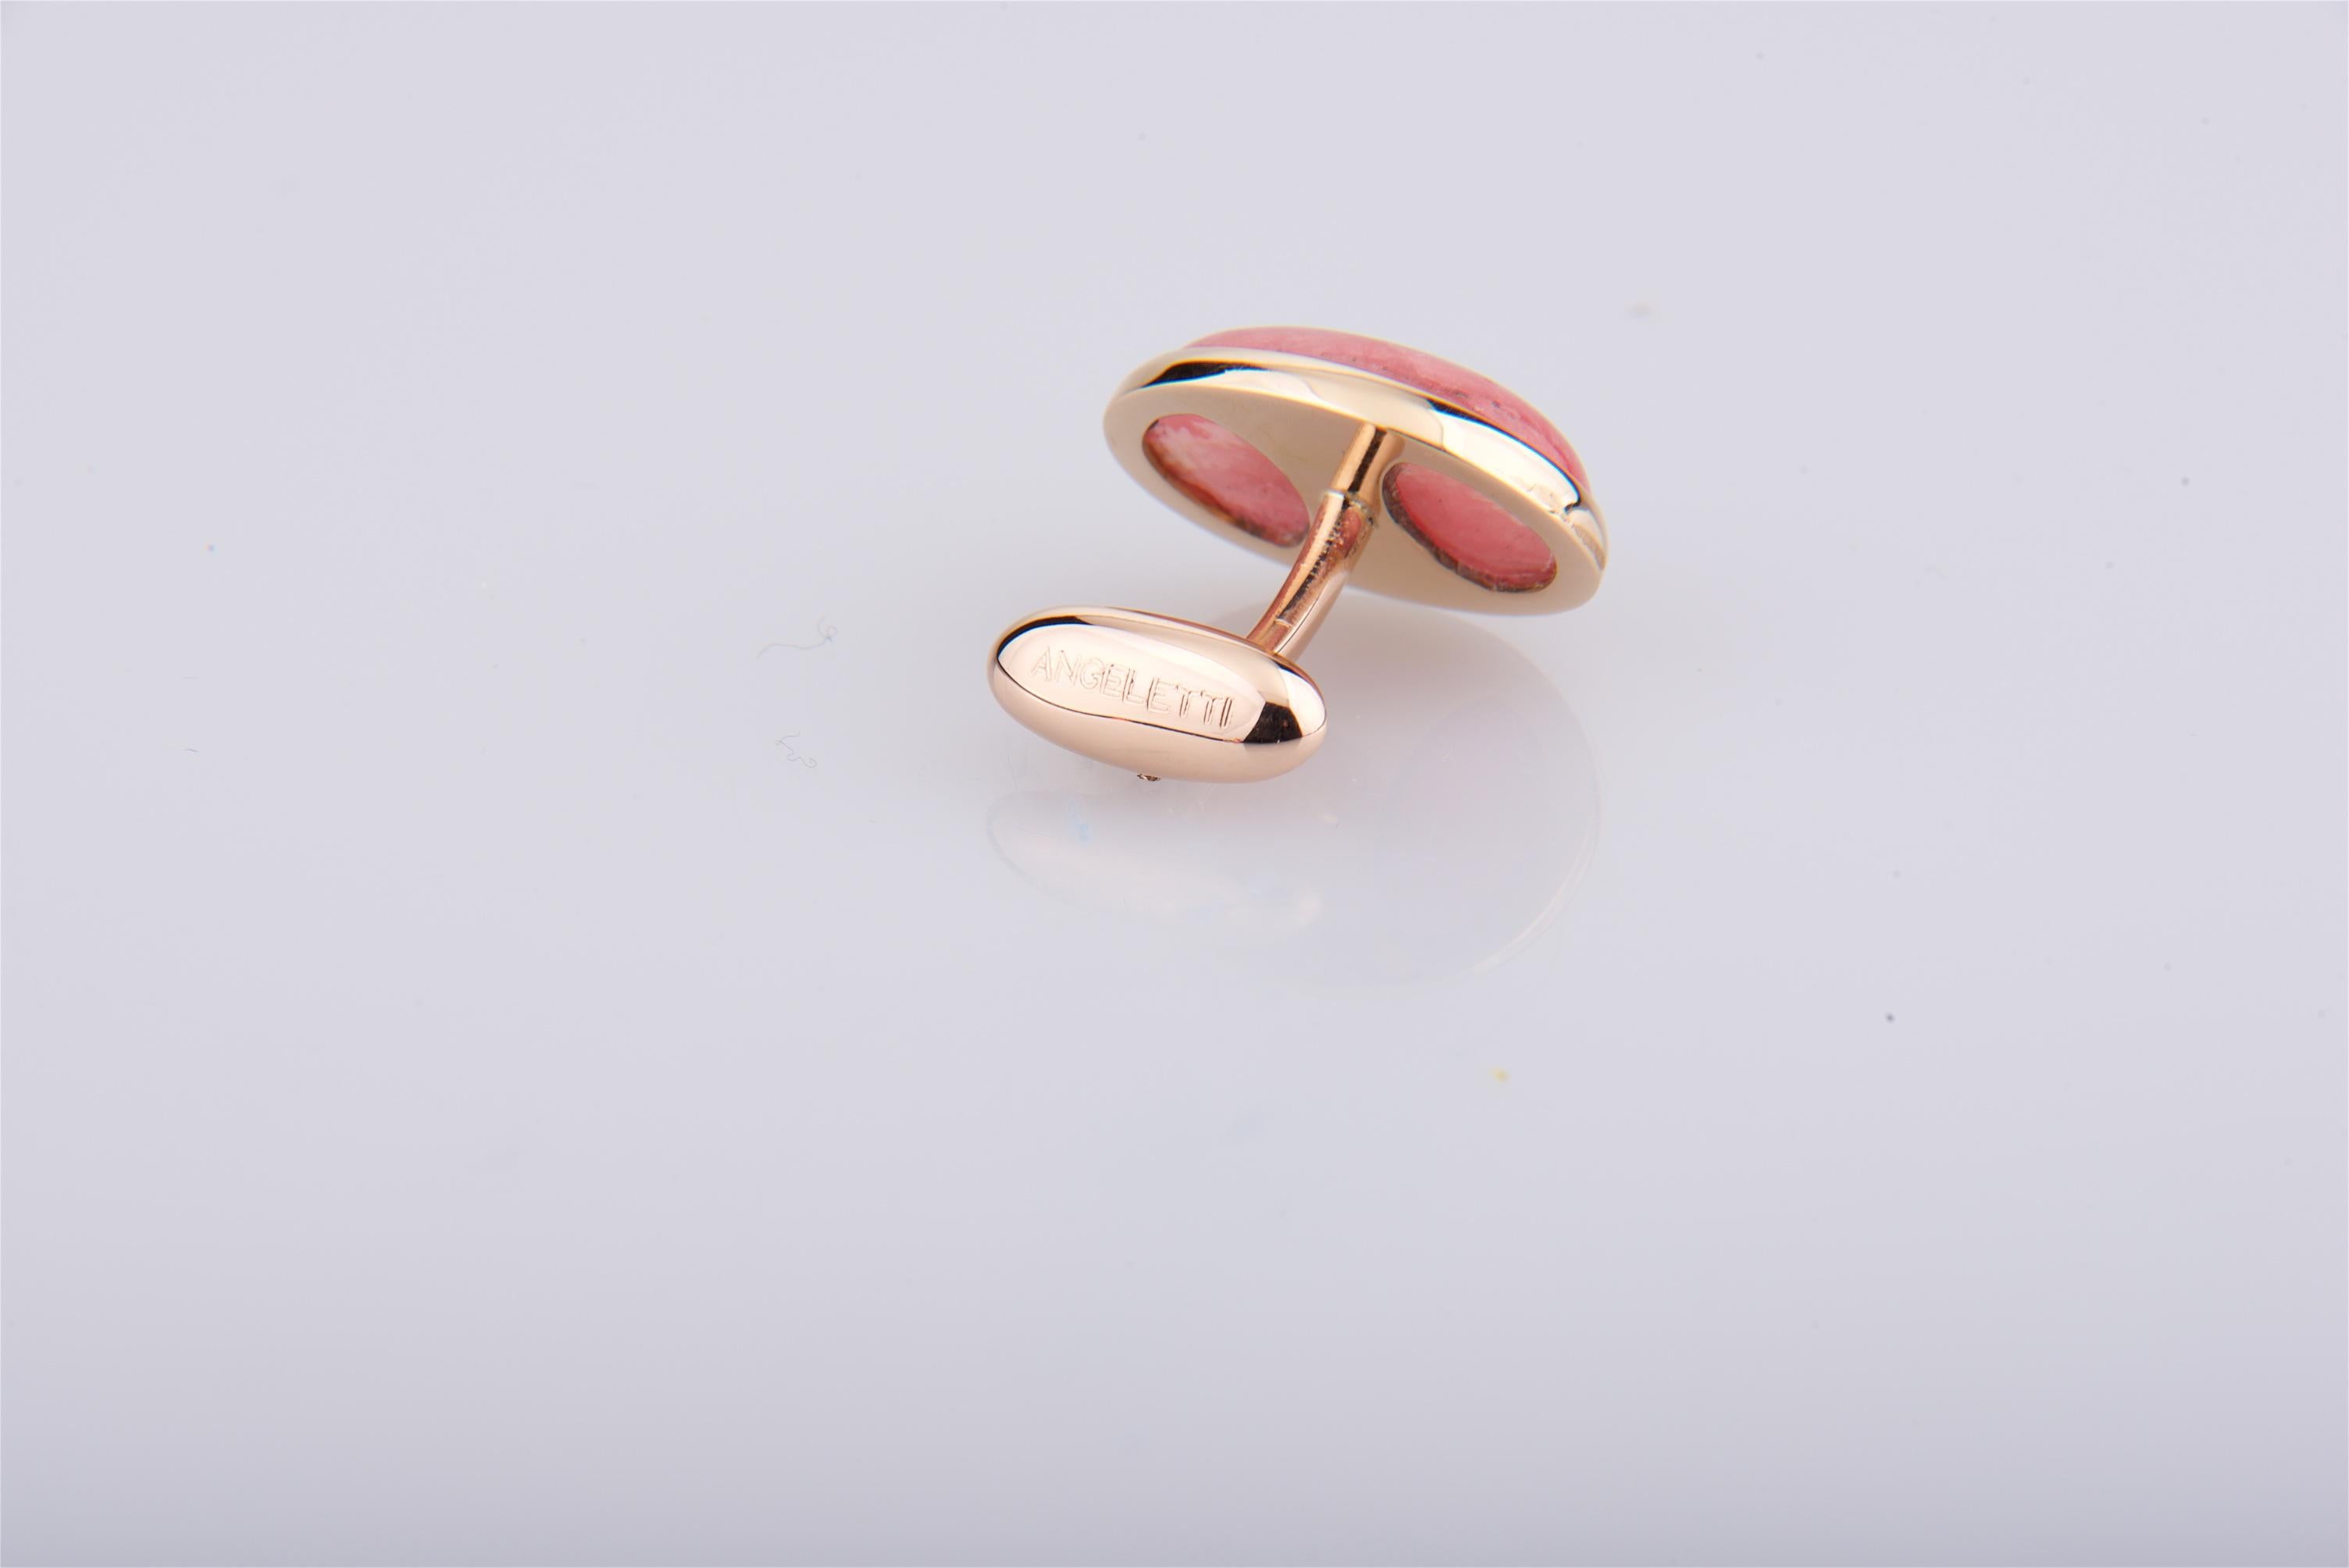 Cufflinks For Men Yellow Gold with Oval Rodocrosite from Argentina.
Everyday Cufflinks for every Business or Leisure Time to be worn on white, light blue or stripe Cuff Shirts.
The stone is particularly attractive for its rare mix of White and Pink